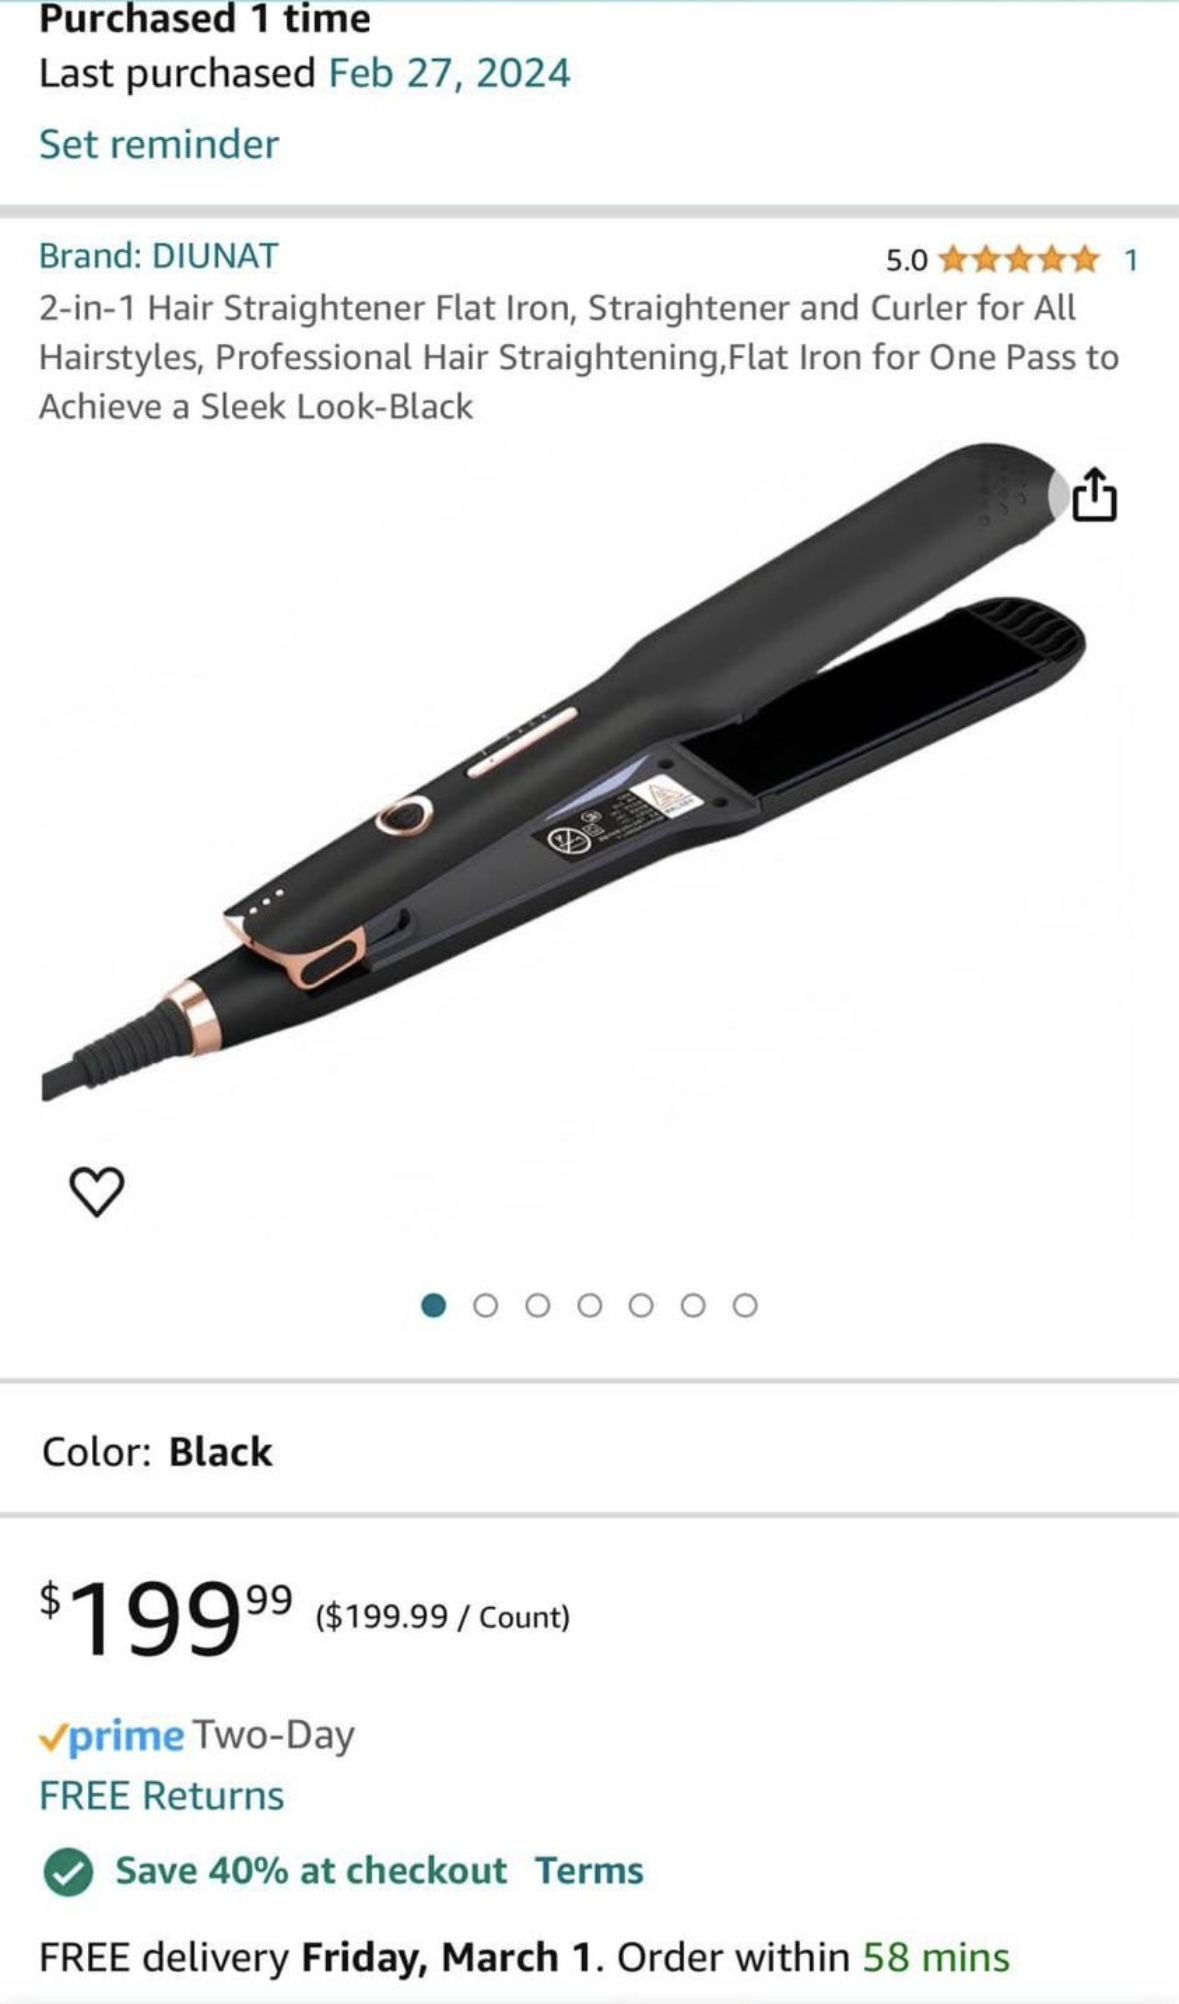 2-in-1 Hair Straightener Flat Iron, Straightener and Curler for All Hairstyles, Professional Hair Straightening,Flat Iron for One Pass to Achieve a Sl